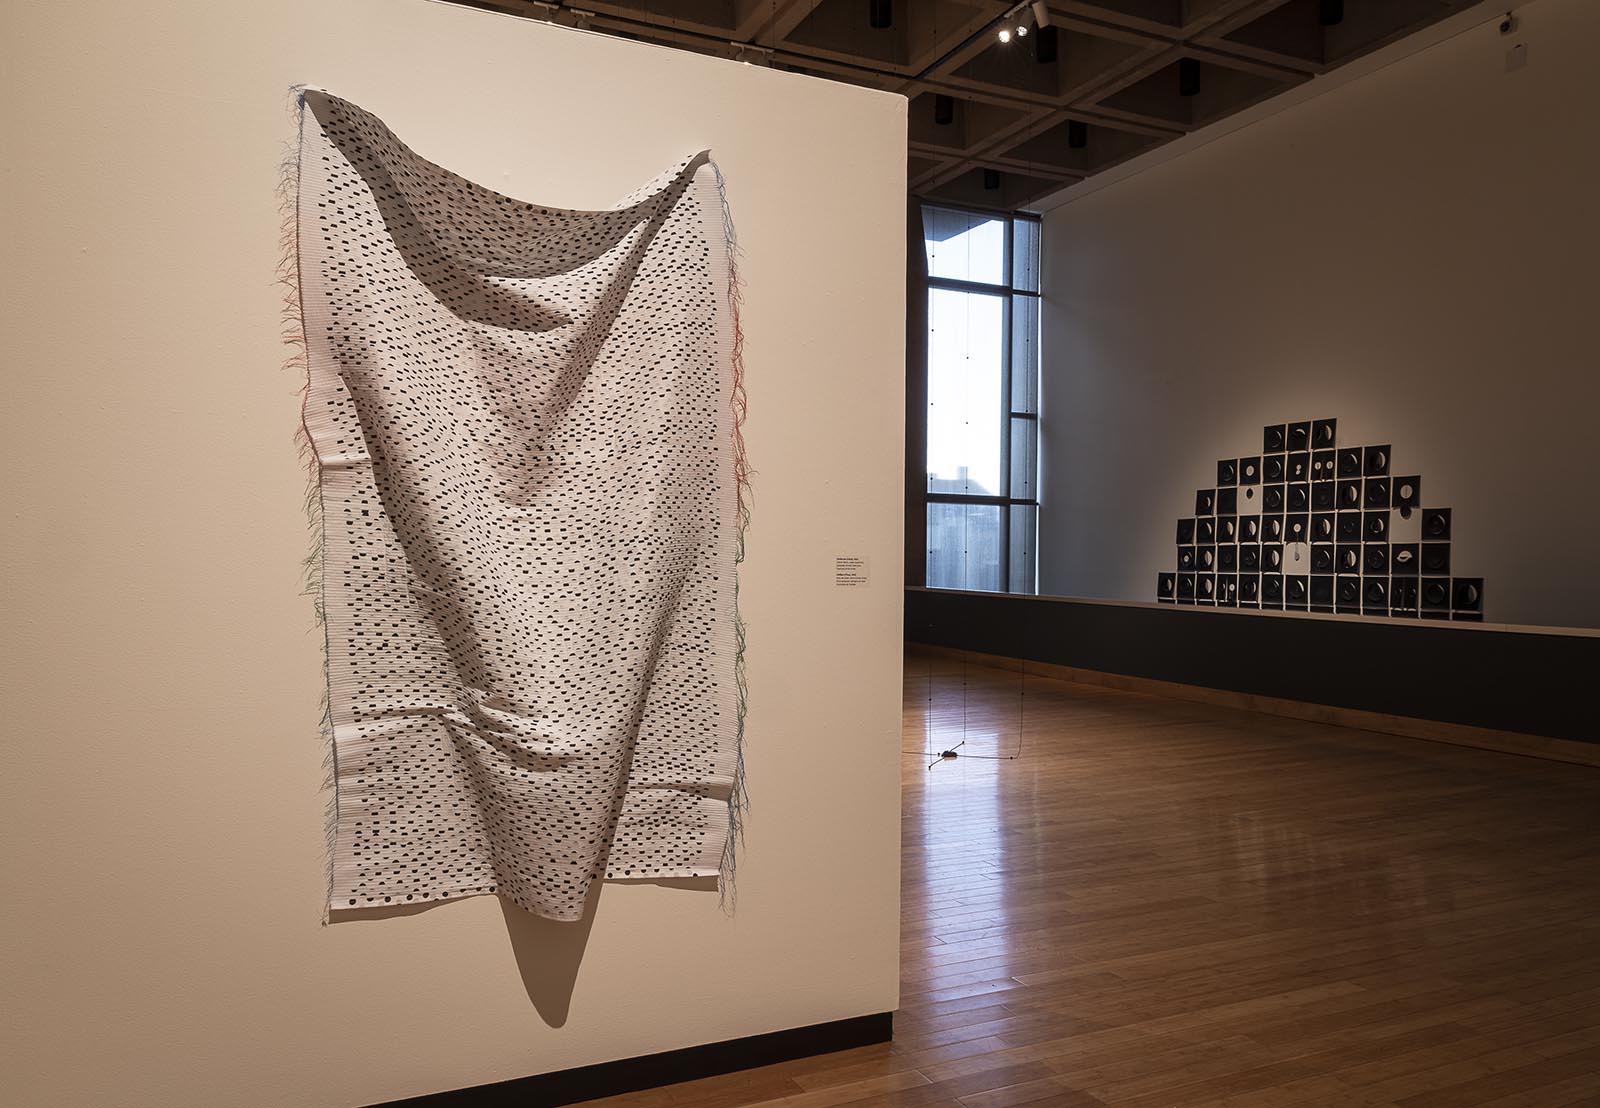 Installation view of "Deliberate (Cloth)" with "Within/Without" and "Squaring Circles" in the background.